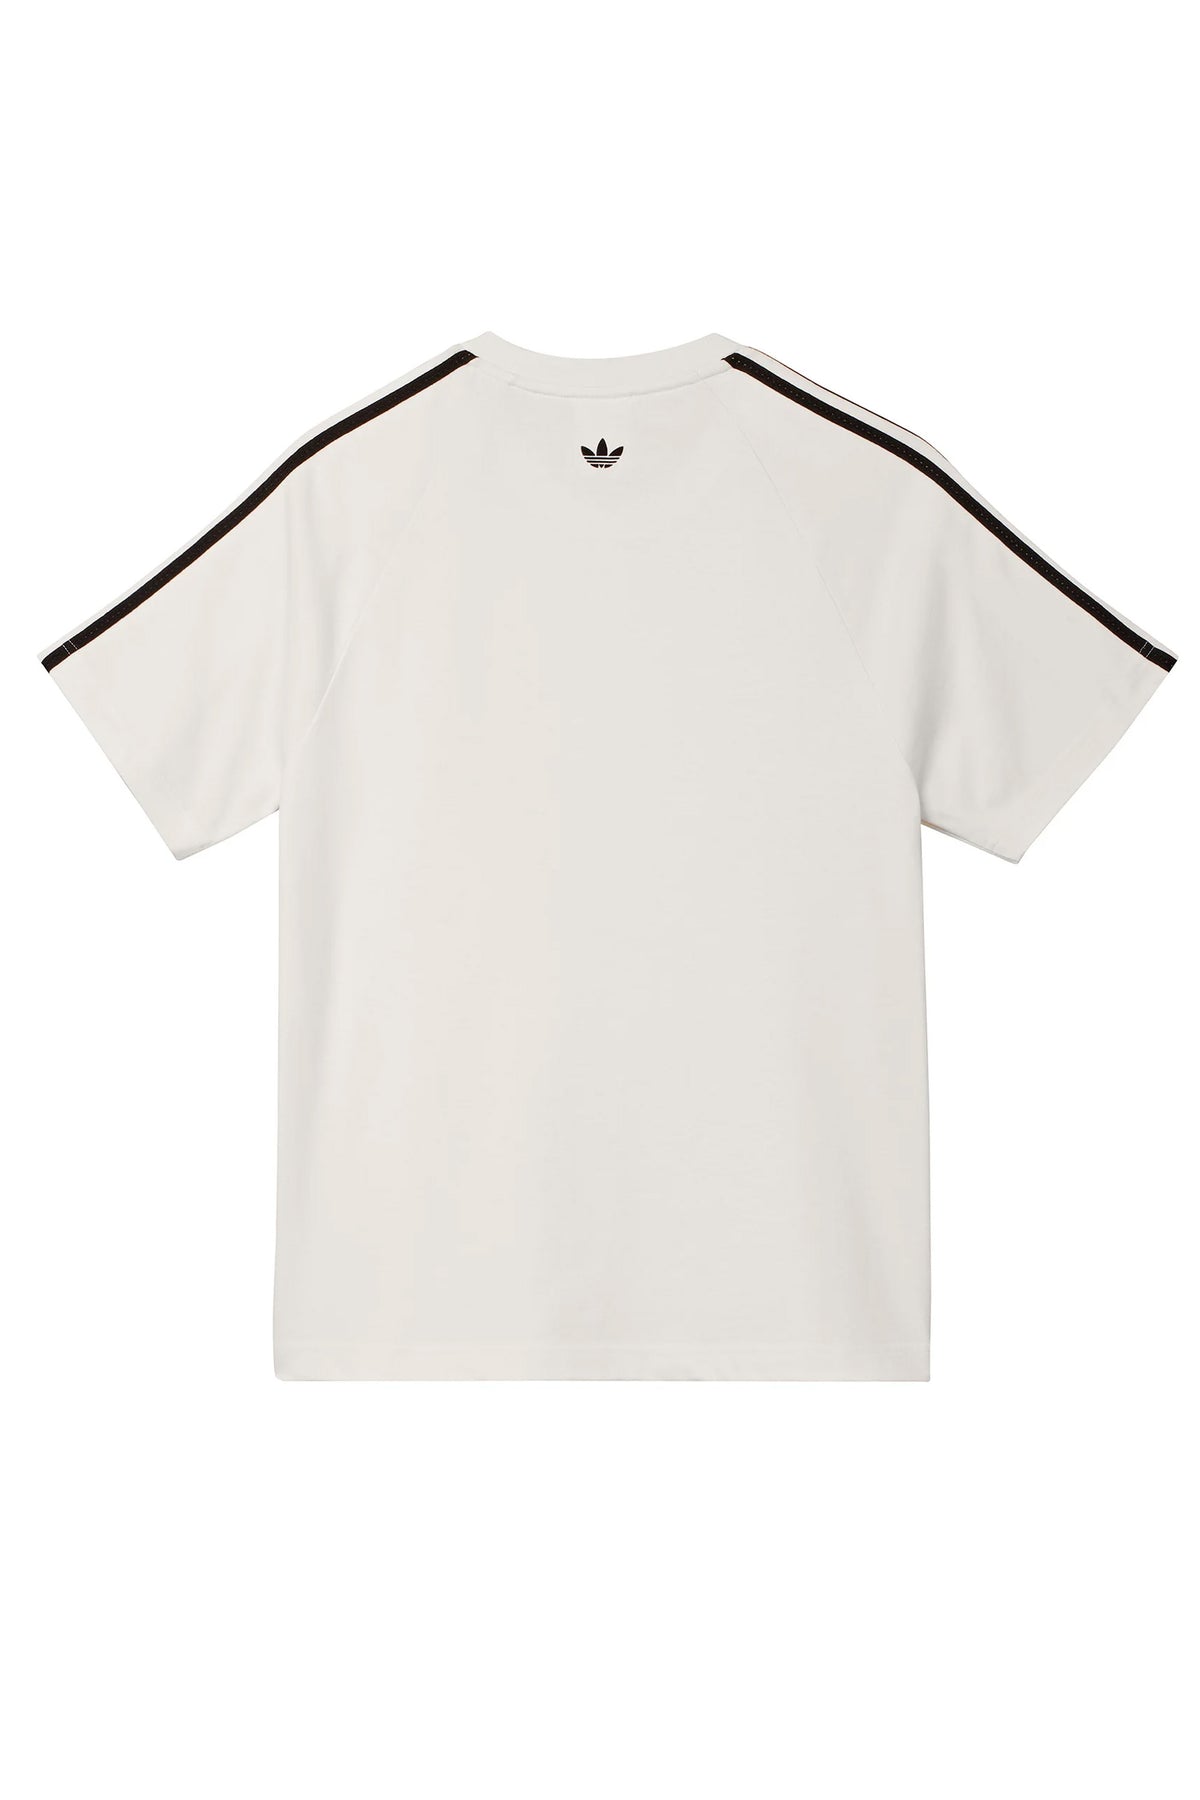 ADIDAS ORIGINALS BY WALES BONNER WB S/S TEE / WHT